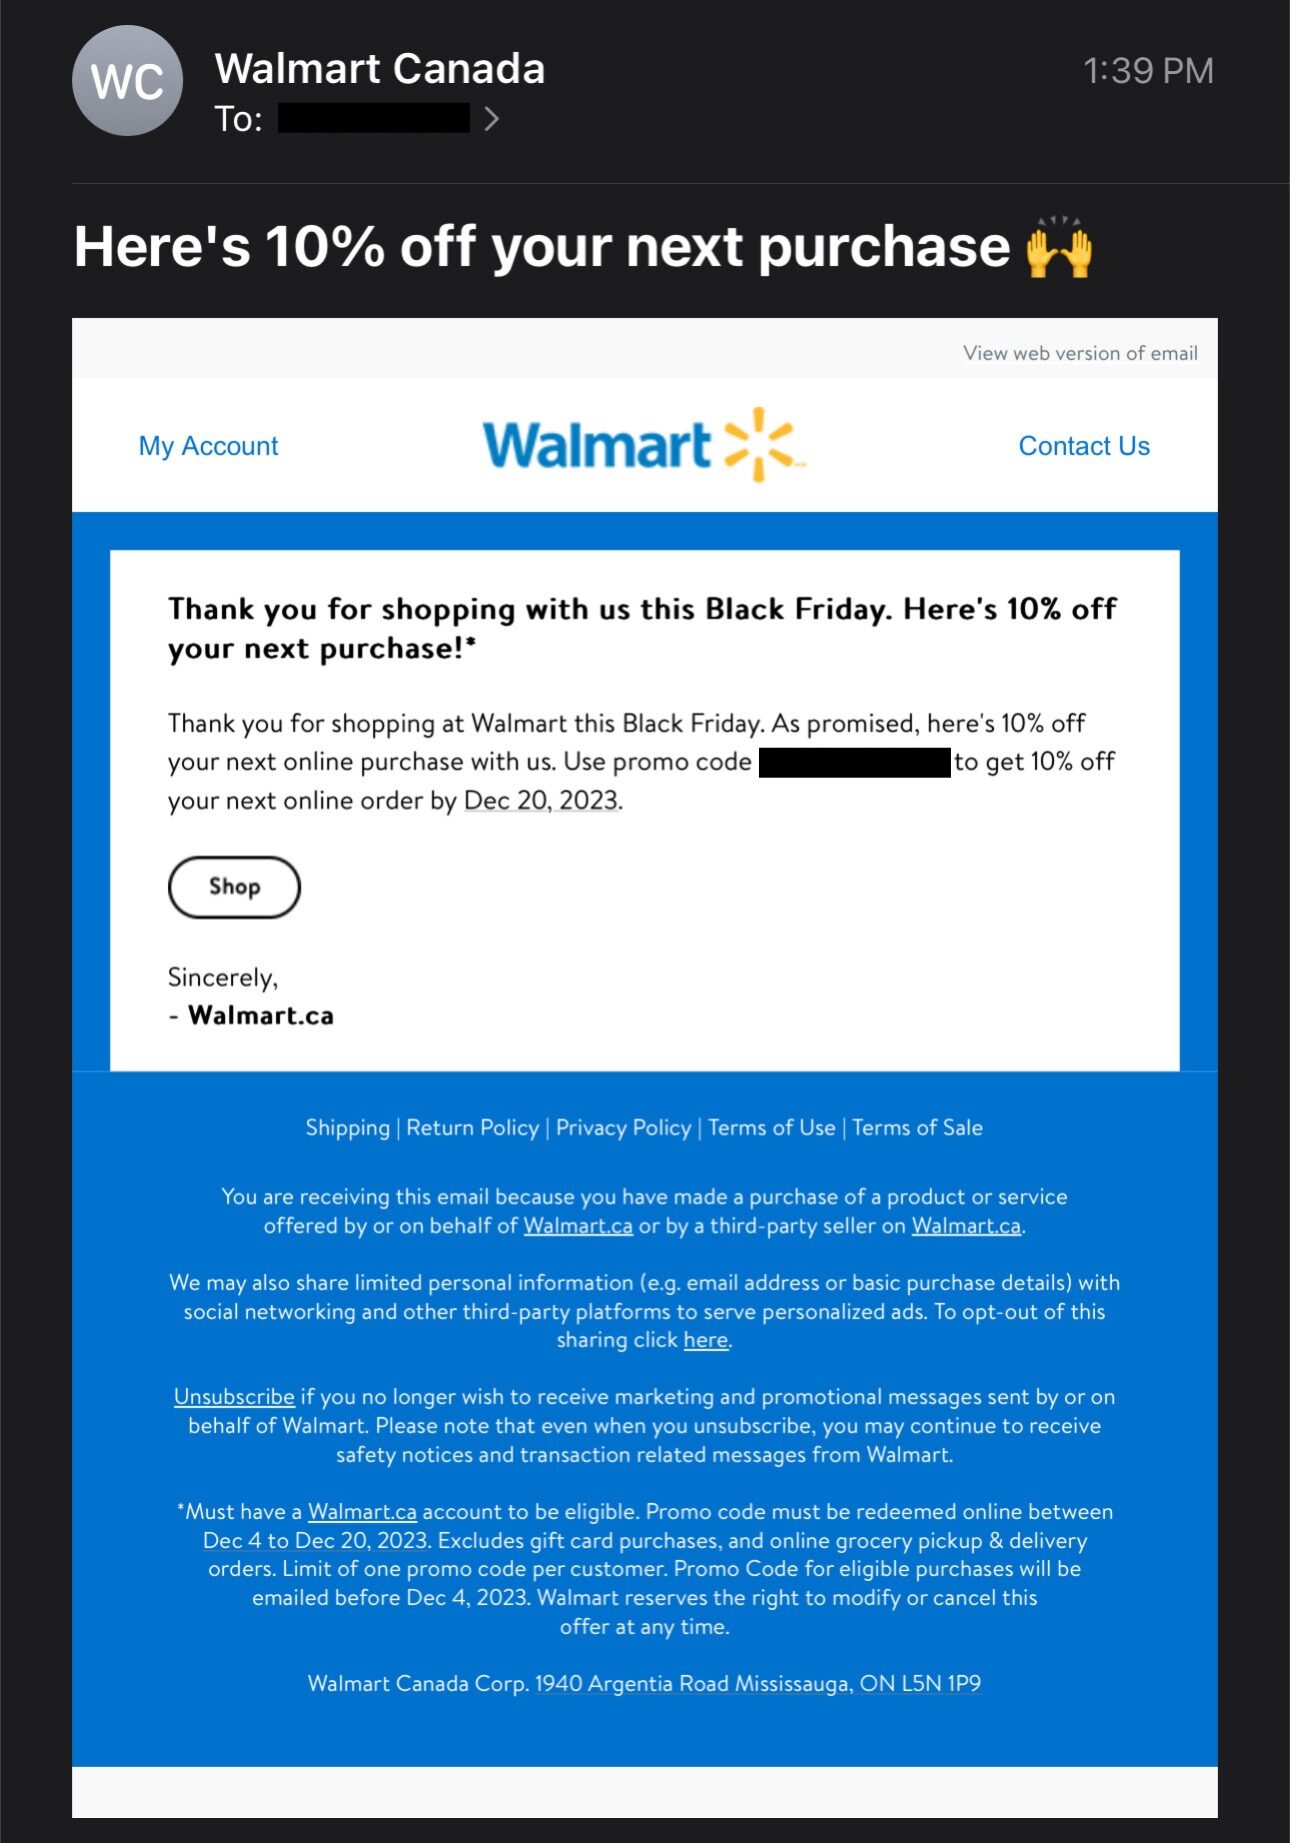 How to order from Walmart Canada, even though I live in the USA